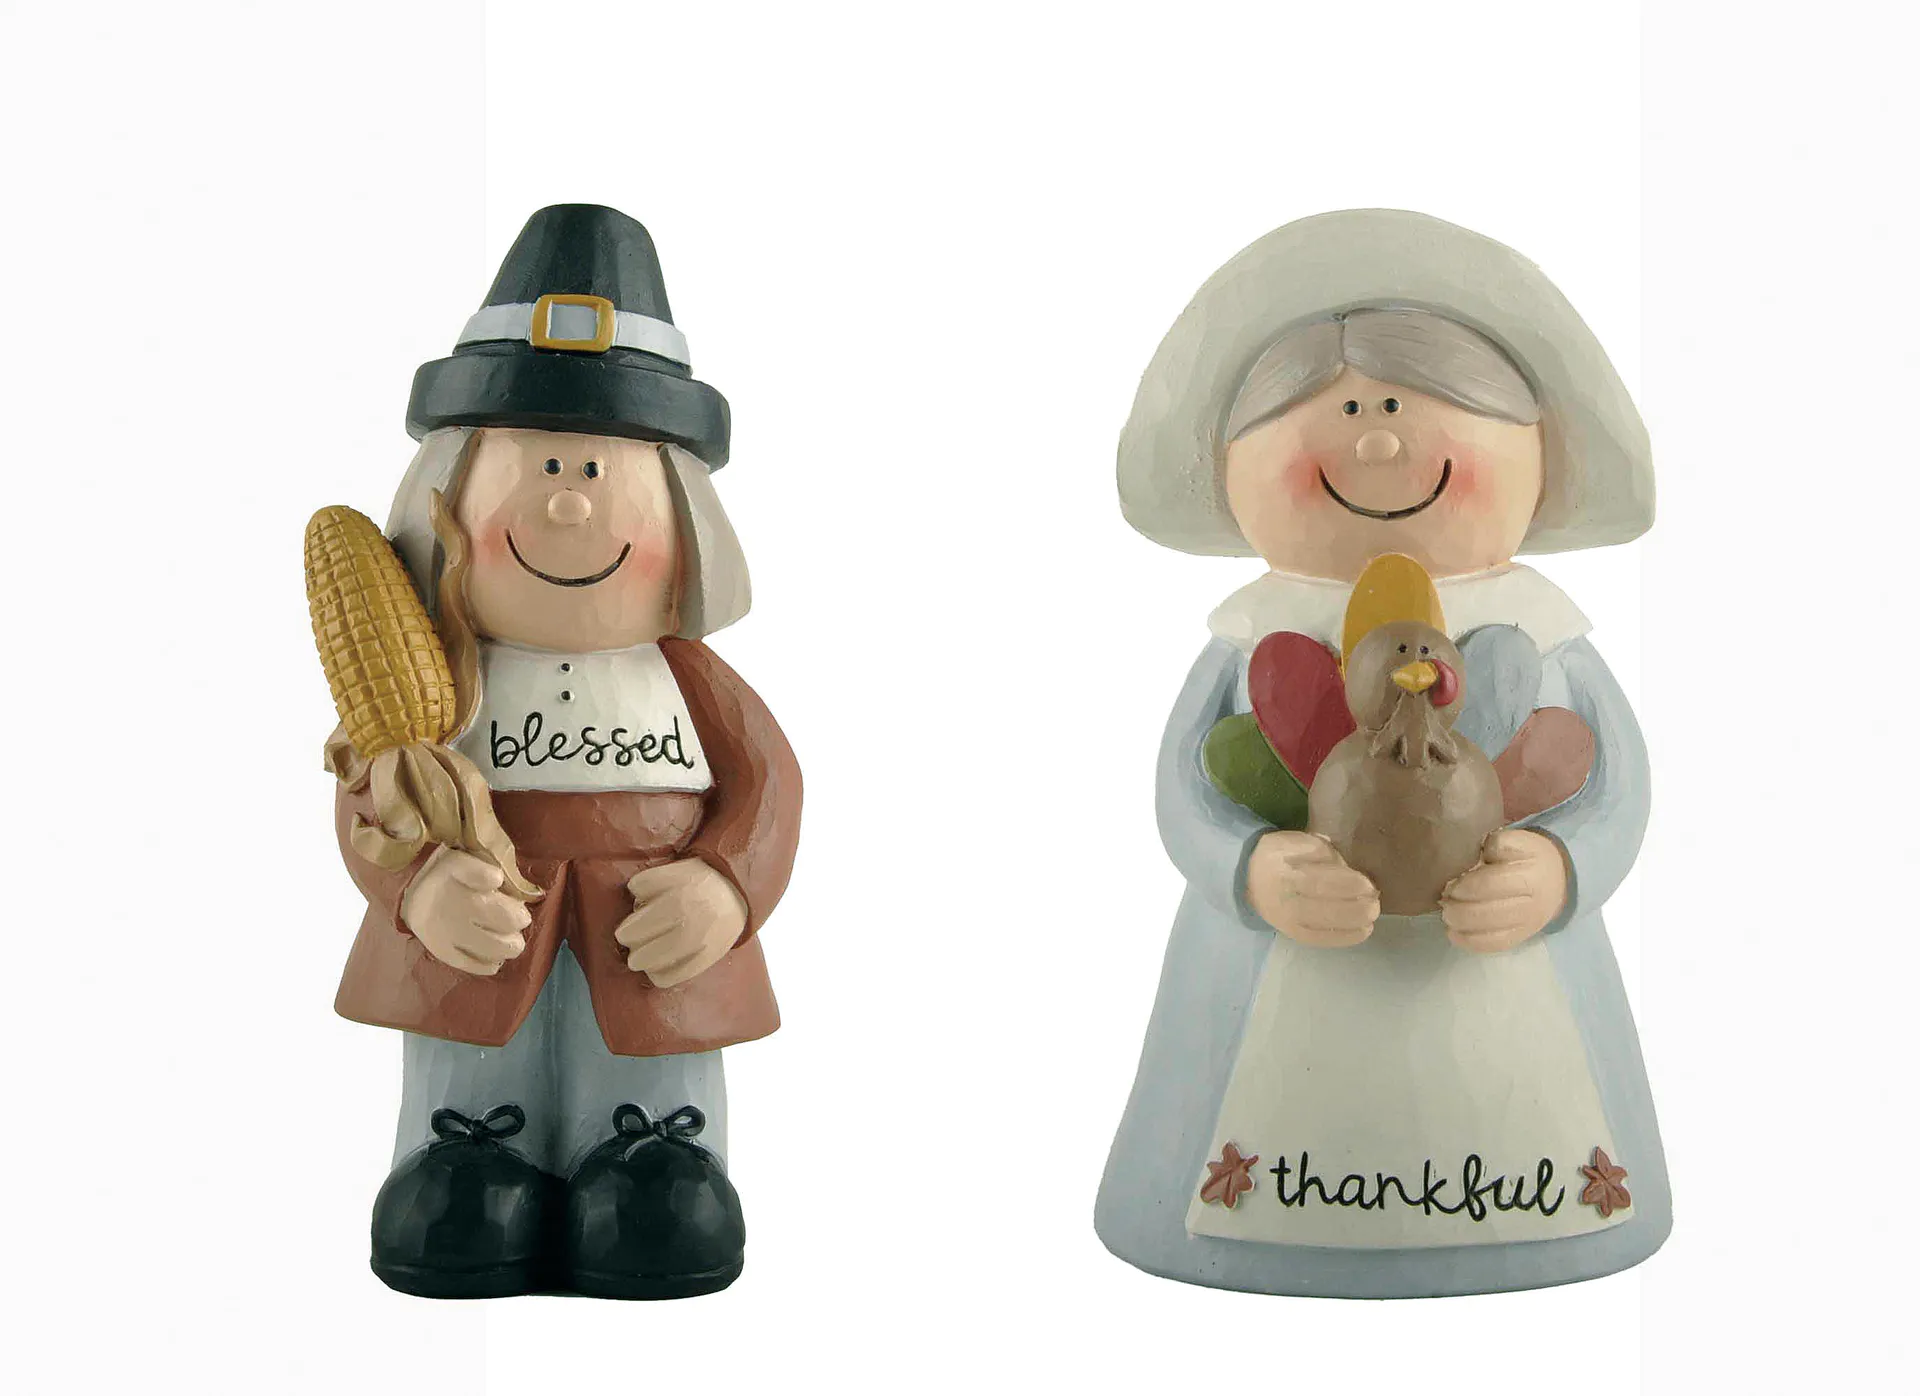 Harvest Festival Resin Crafts S/2 Woman with Turkey And Man with Corn for Home Decoration236-13700